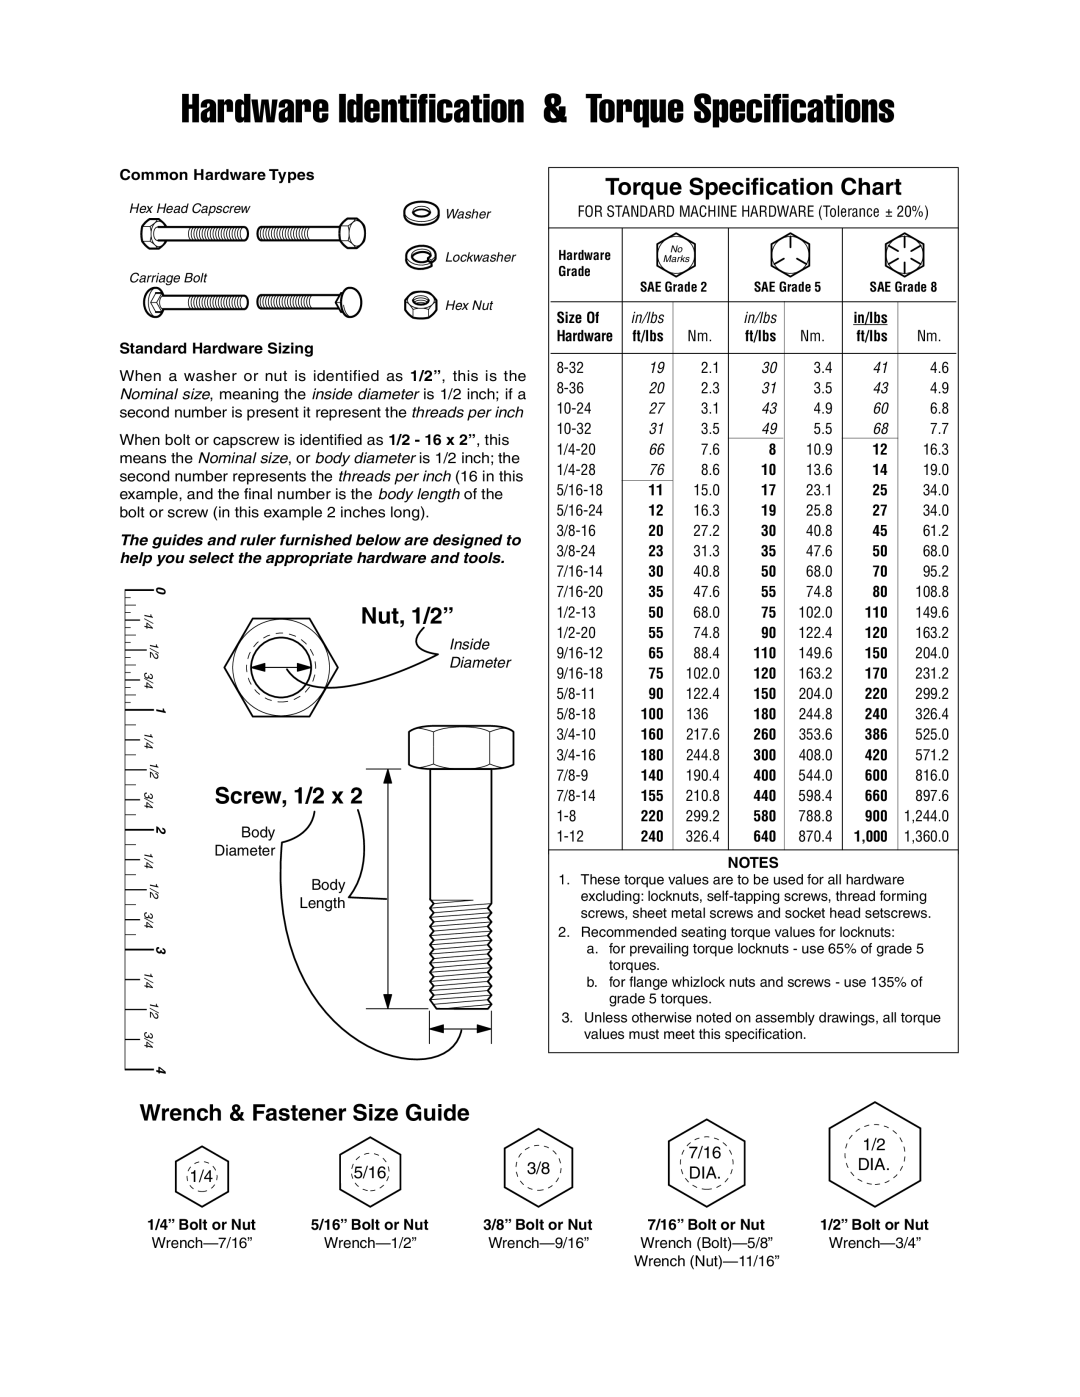 Simplicity 1695163 Wrench & Fastener Size Guide, Hardware Identification & Torque Specifications, Nut, 1/2”, Screw, 1/2 